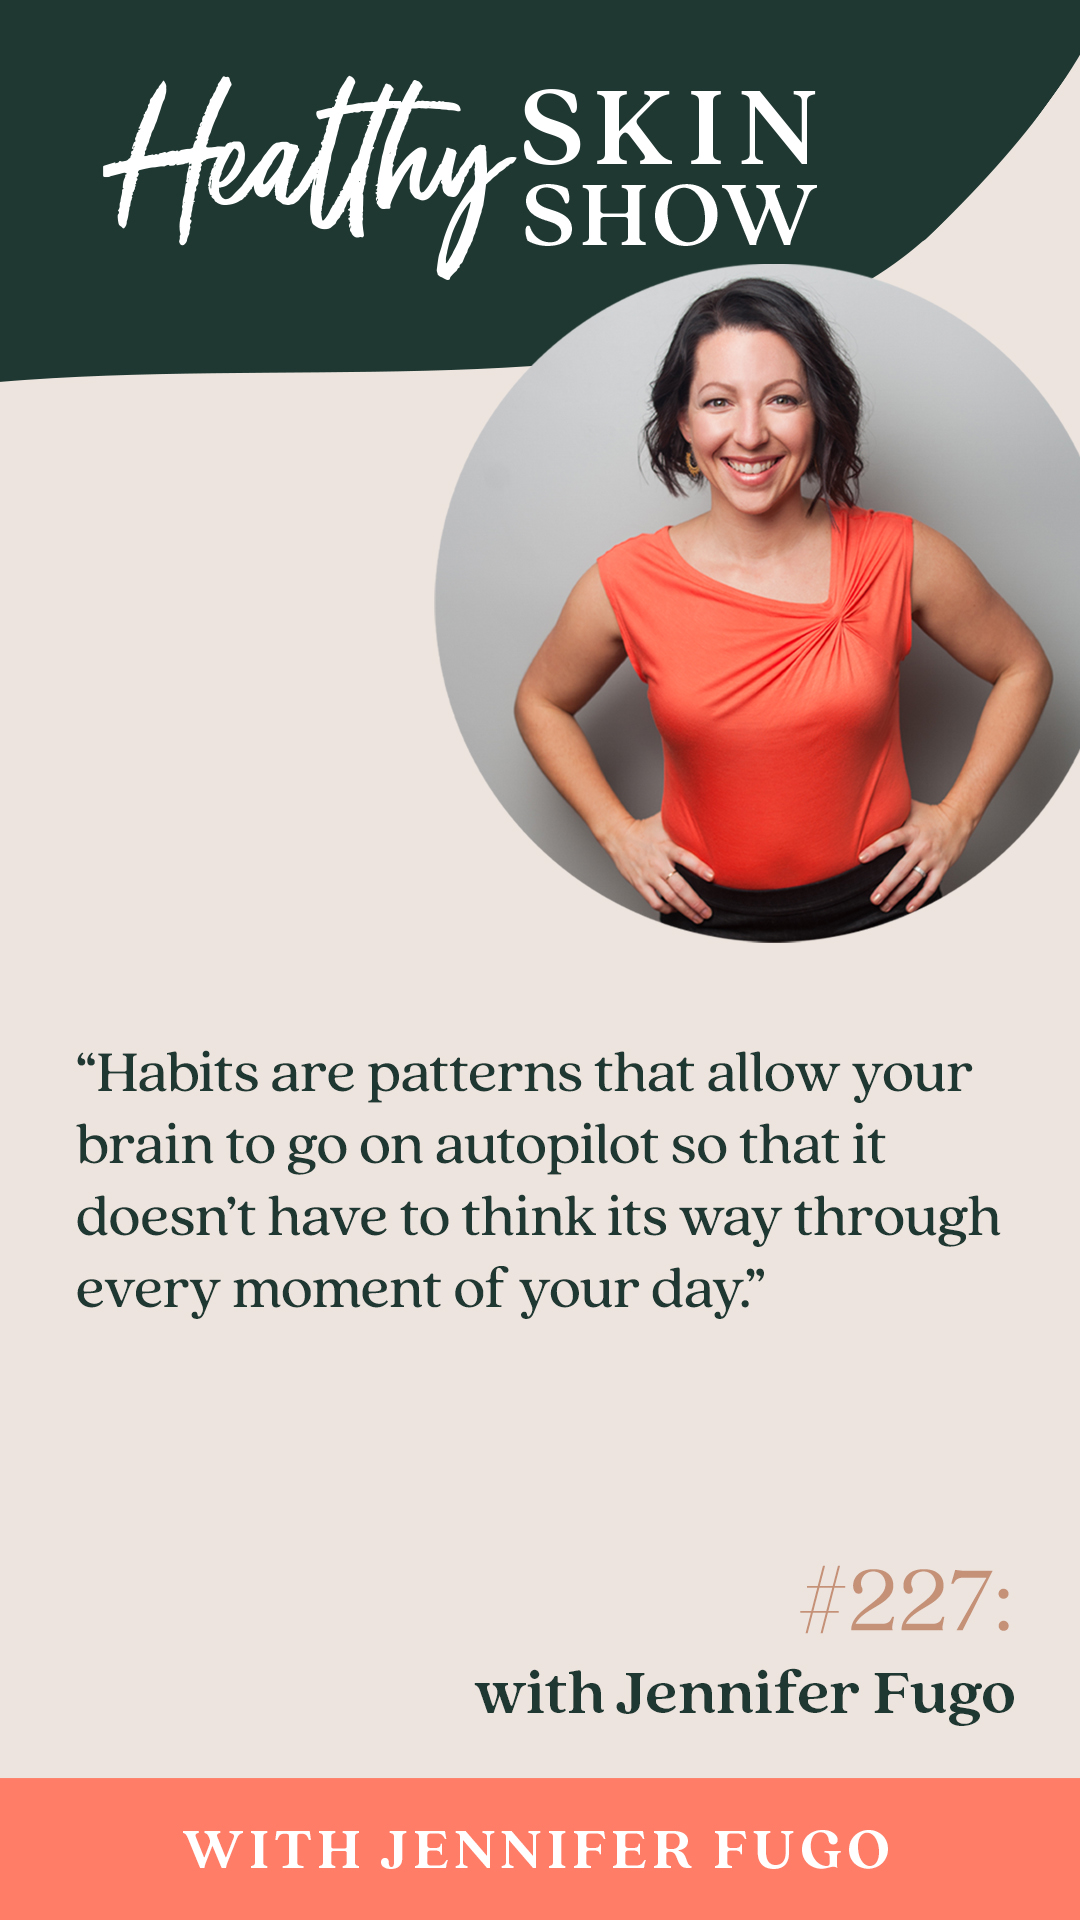 Habits are patterns that allow your brain to go on autopilot so that it doesn’t have to think its way through every moment of your day.